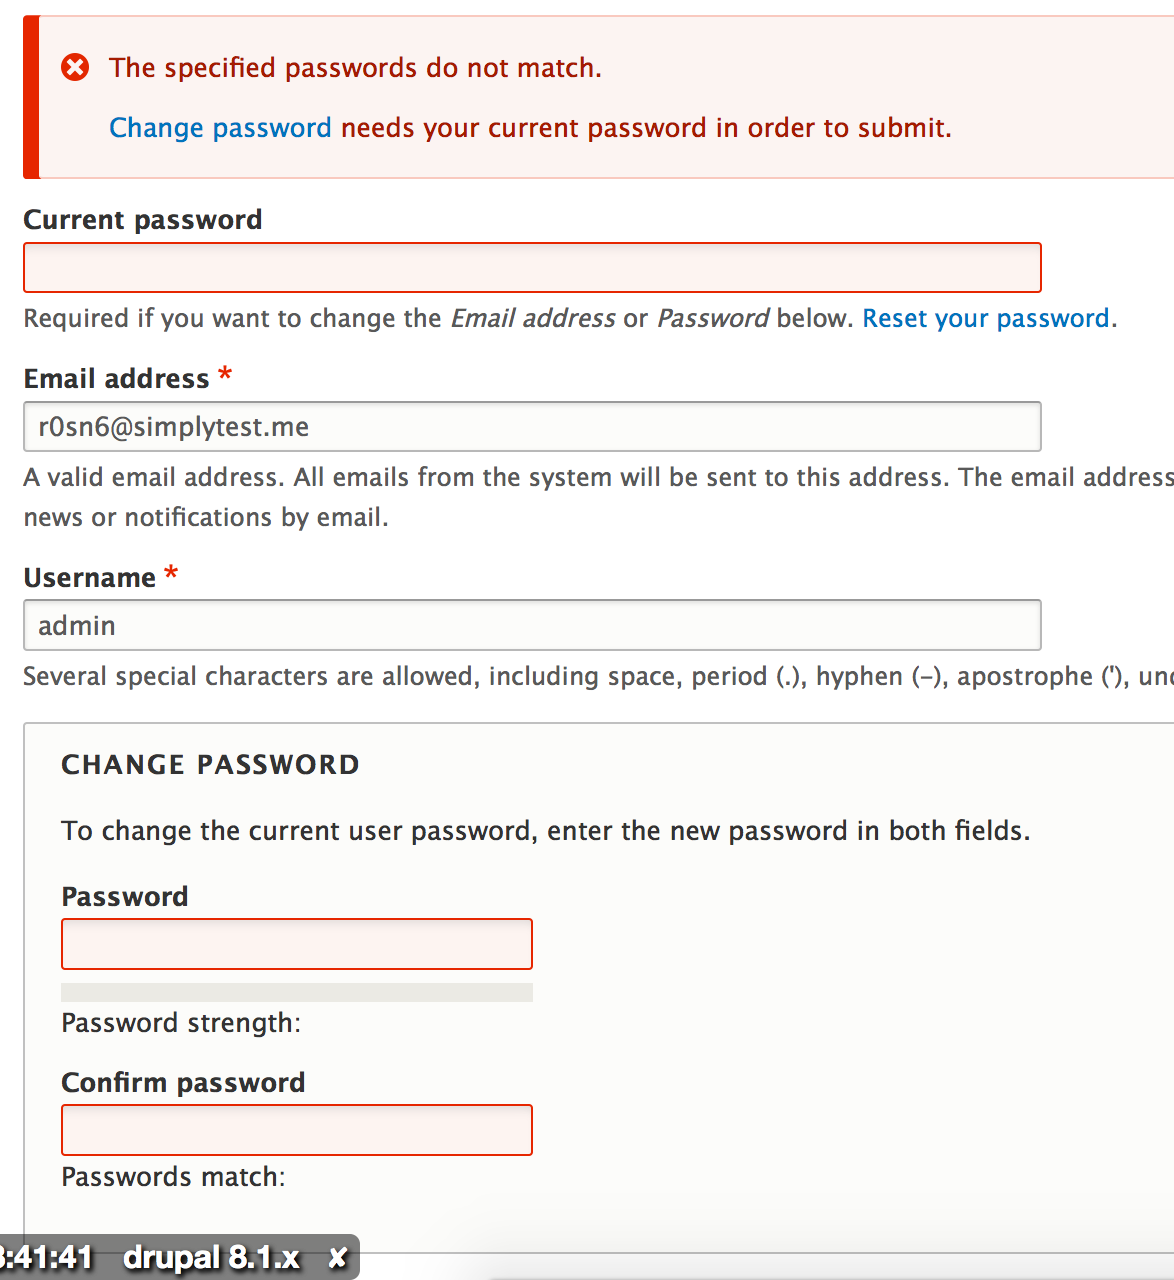 Error Highlighting And Reporting Problems For The Current Password On The User Profile Form 2455933 Drupal Org